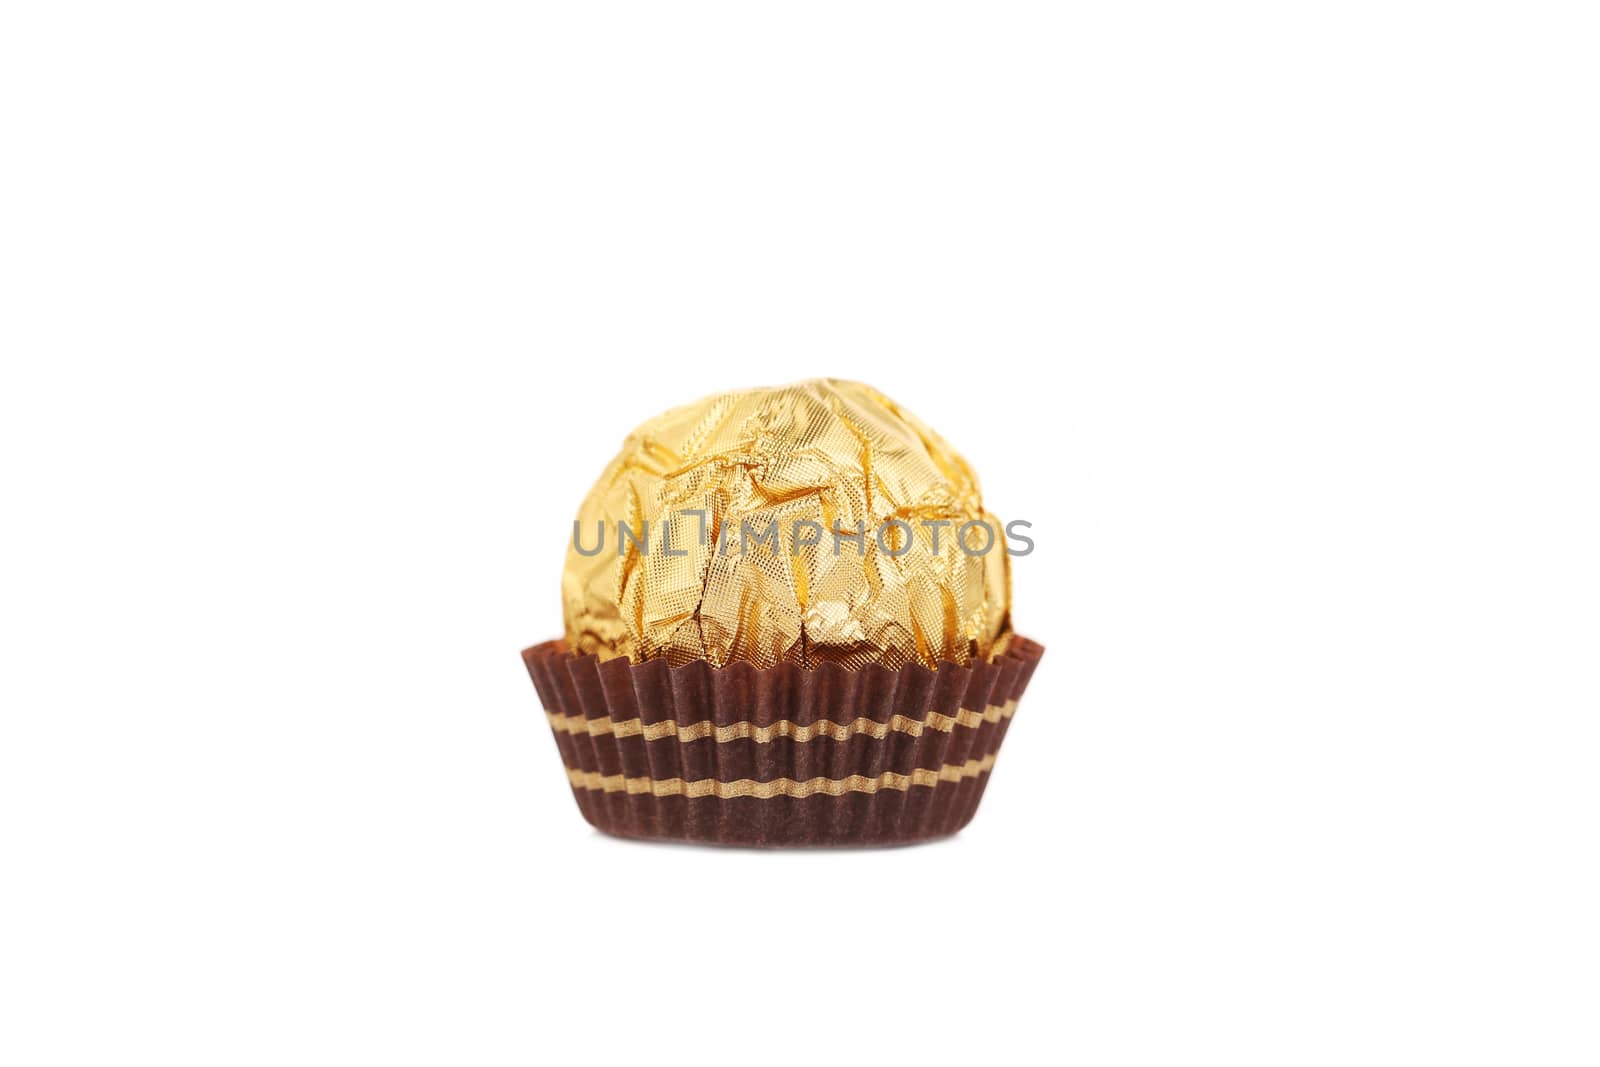 Close up of chocolate gold bonbon. Isolated on a white background.